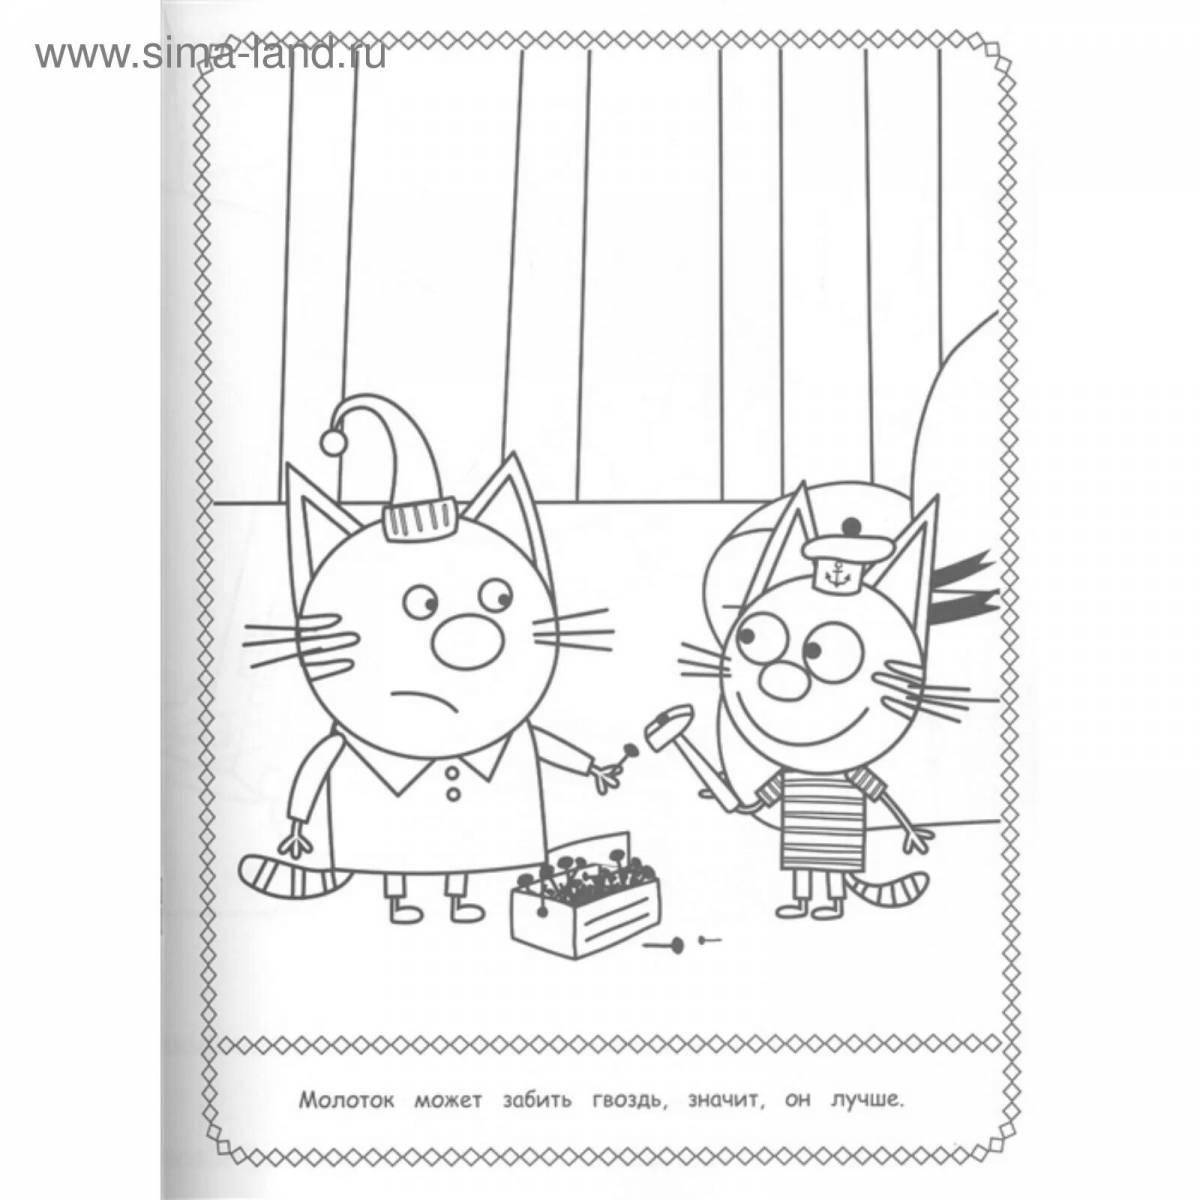 Three cats game for kids #1